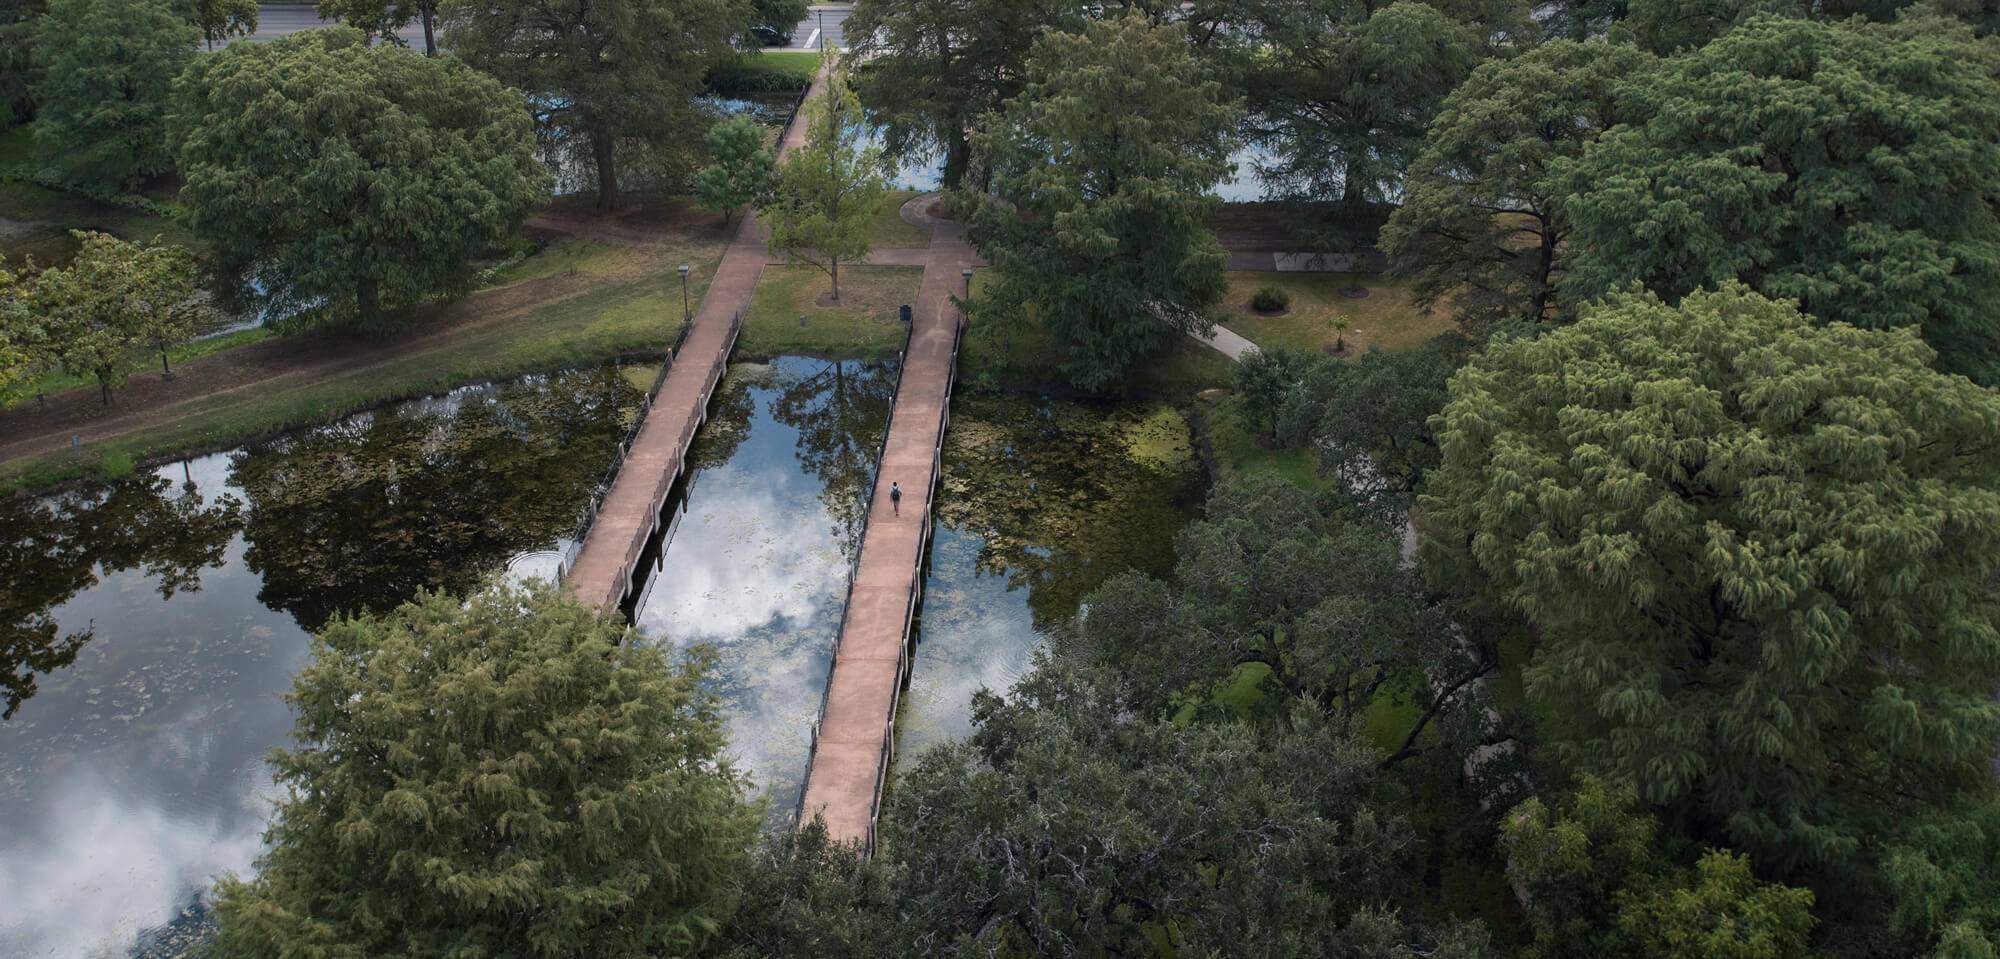 Two walkway bridges over pond surrounded by greenery